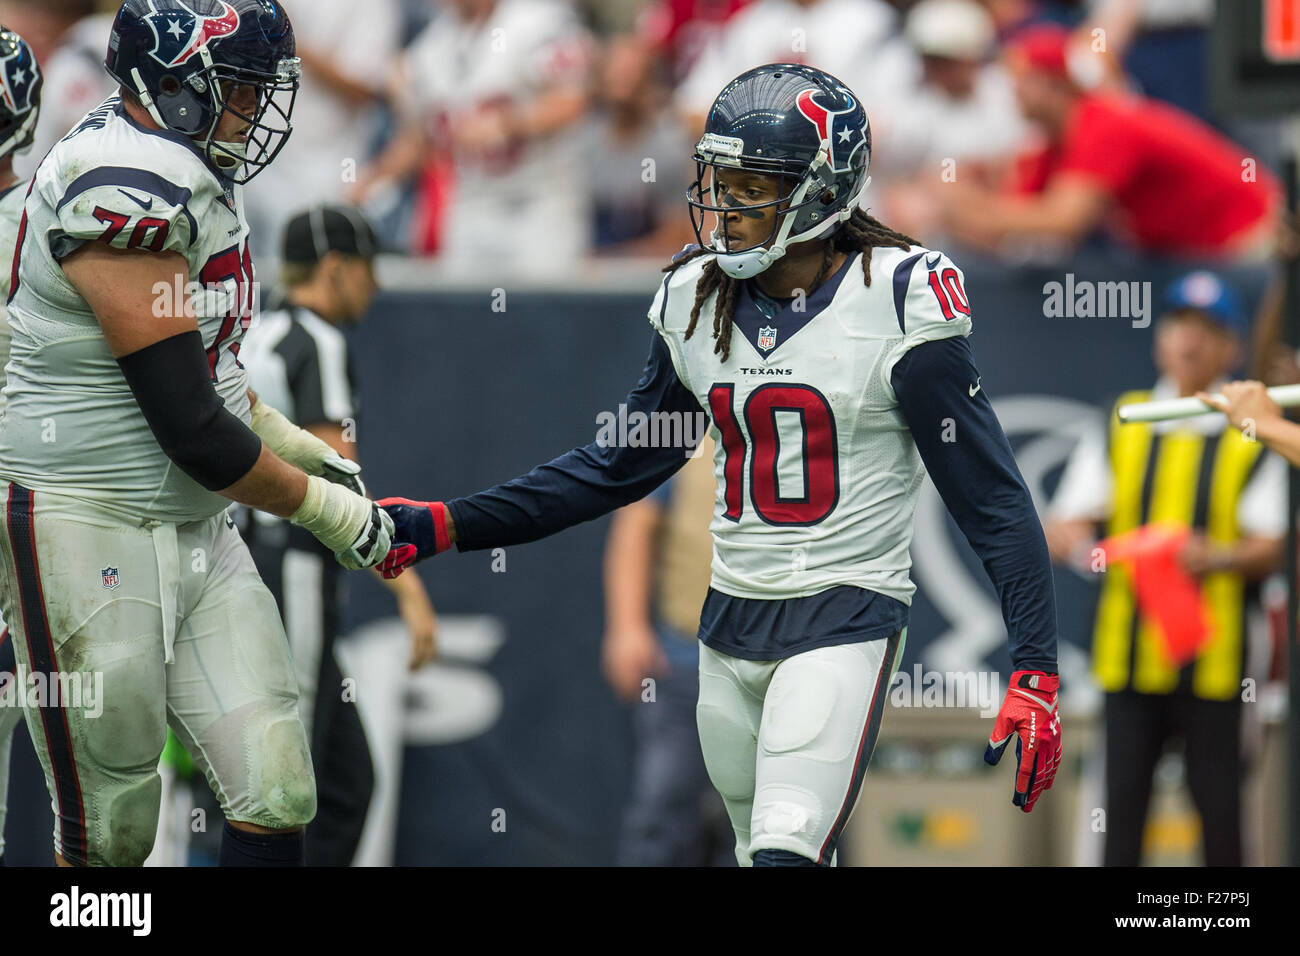 Houston, Texas, USA. 13th Sep, 2015. Houston Texans wide receiver DeAndre Hopkins (10) celebrates with Houston Texans tackle Jeff Adams (70) after making a catch for a 2 point conversion during the 4th quarter of an NFL game between the Houston Texans and the Kansas City Chiefs at NRG Stadium in Houston, TX on September 13th, 2015. The Chiefs won 27-20. Credit:  Trask Smith/ZUMA Wire/Alamy Live News Stock Photo